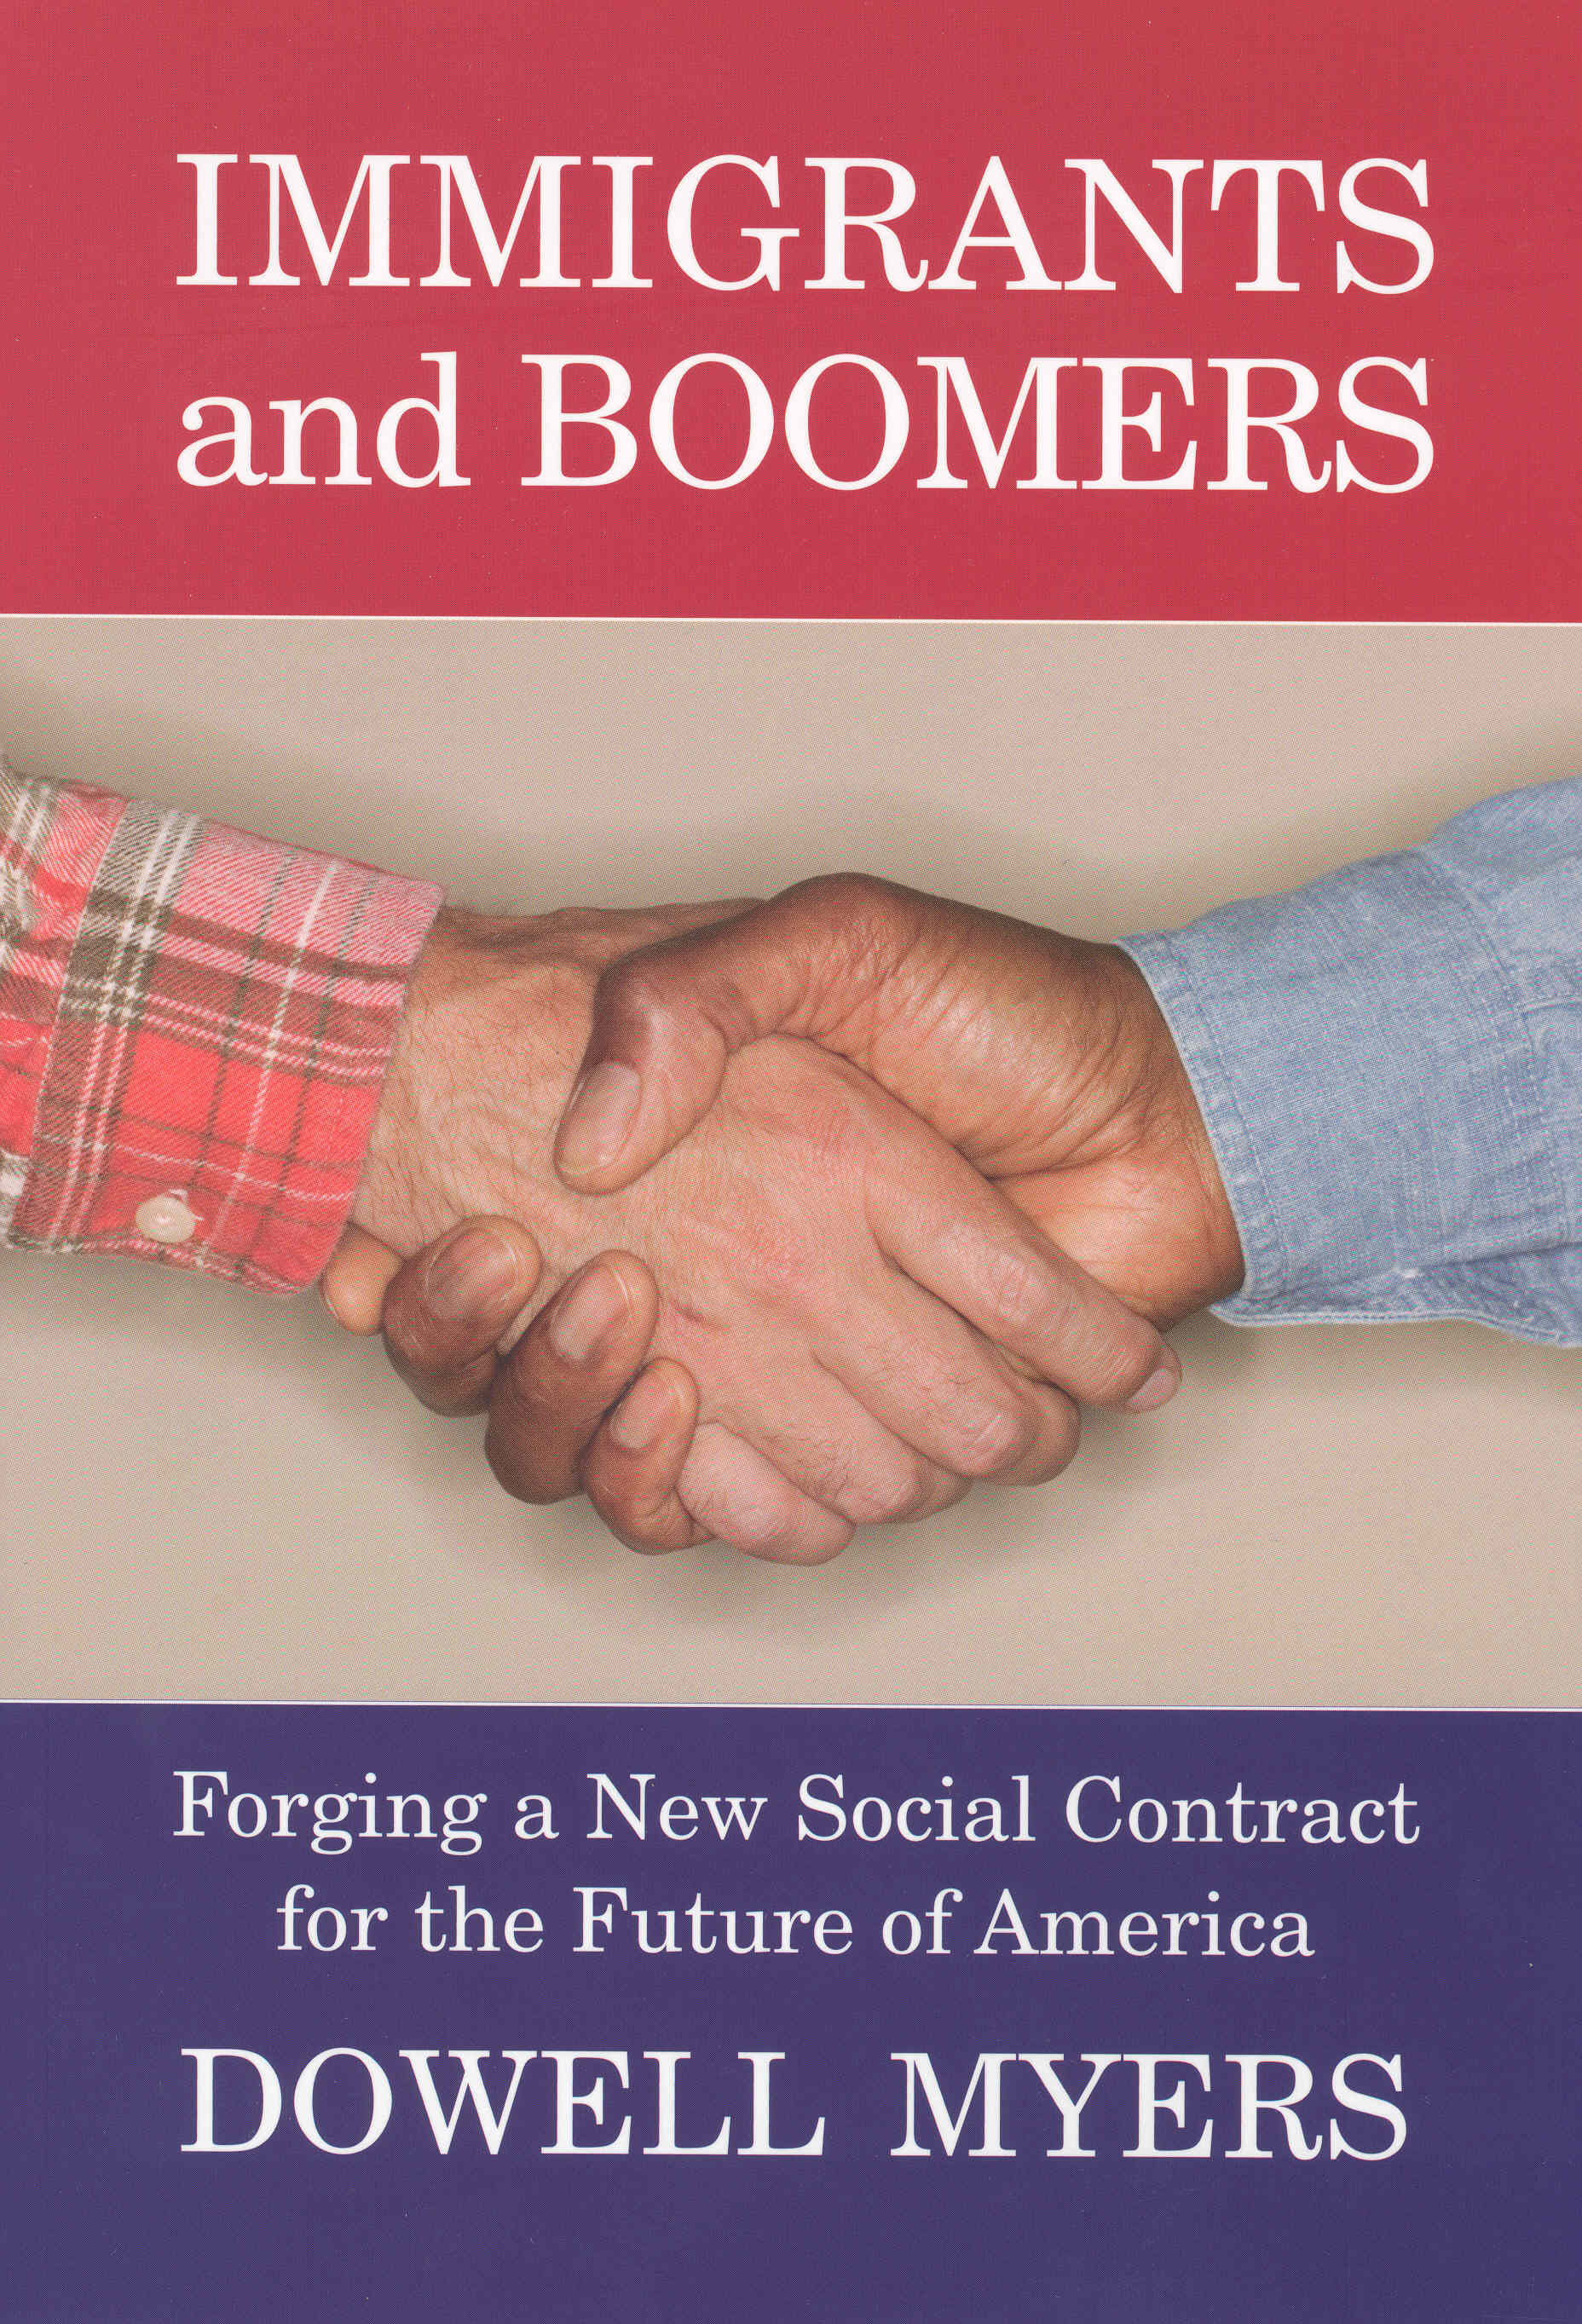 Immigrants and Boomers